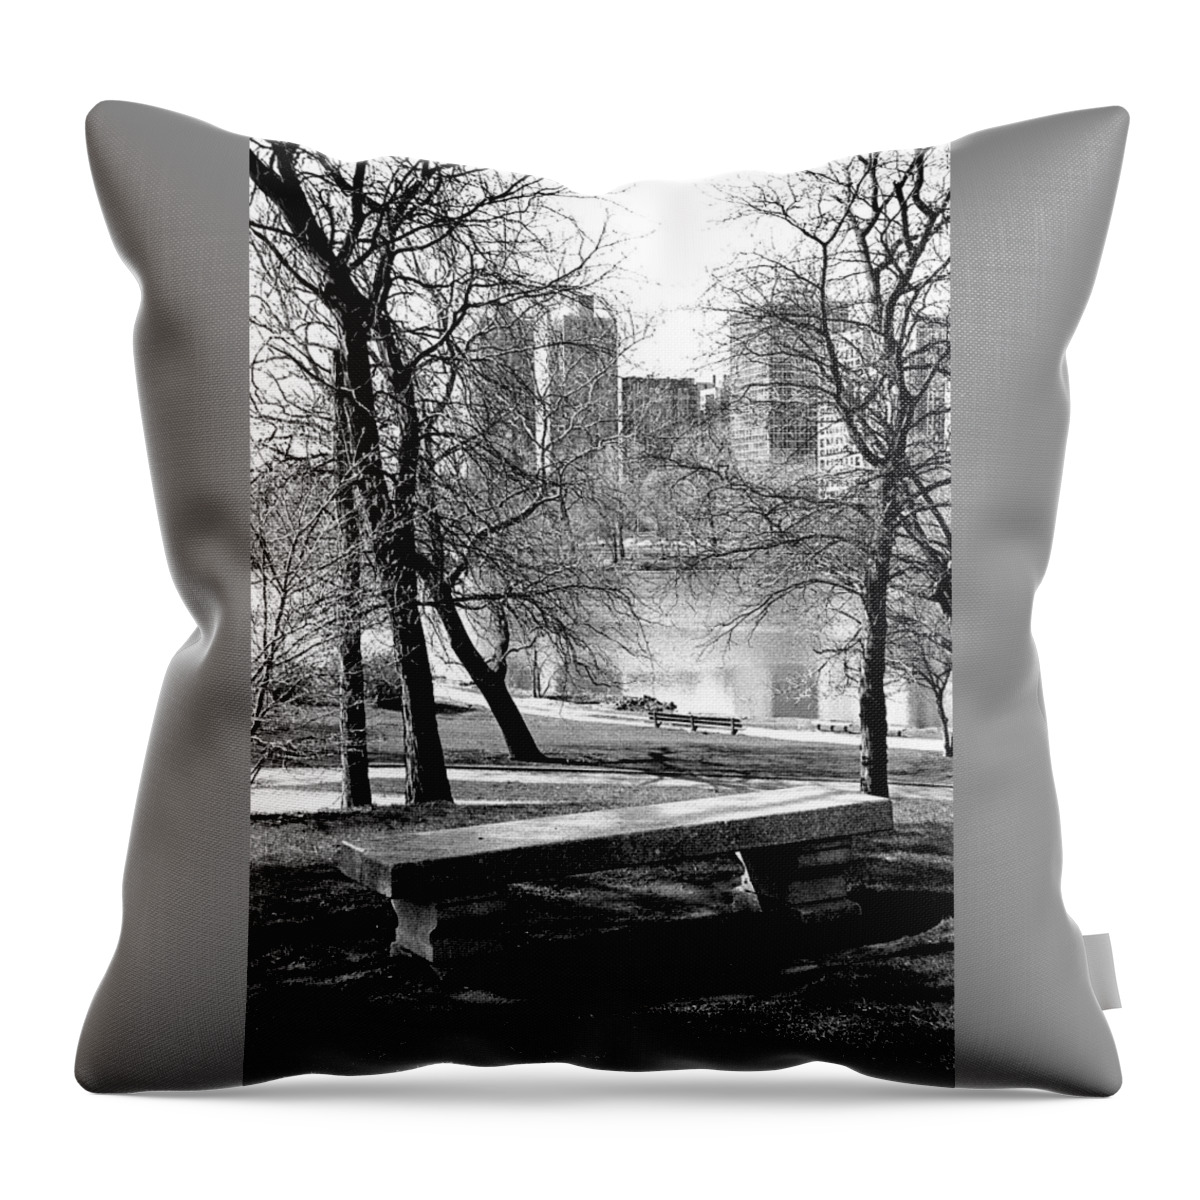 Landscape Throw Pillow featuring the photograph Quiet Thoughts by Carol Neal-Chicago